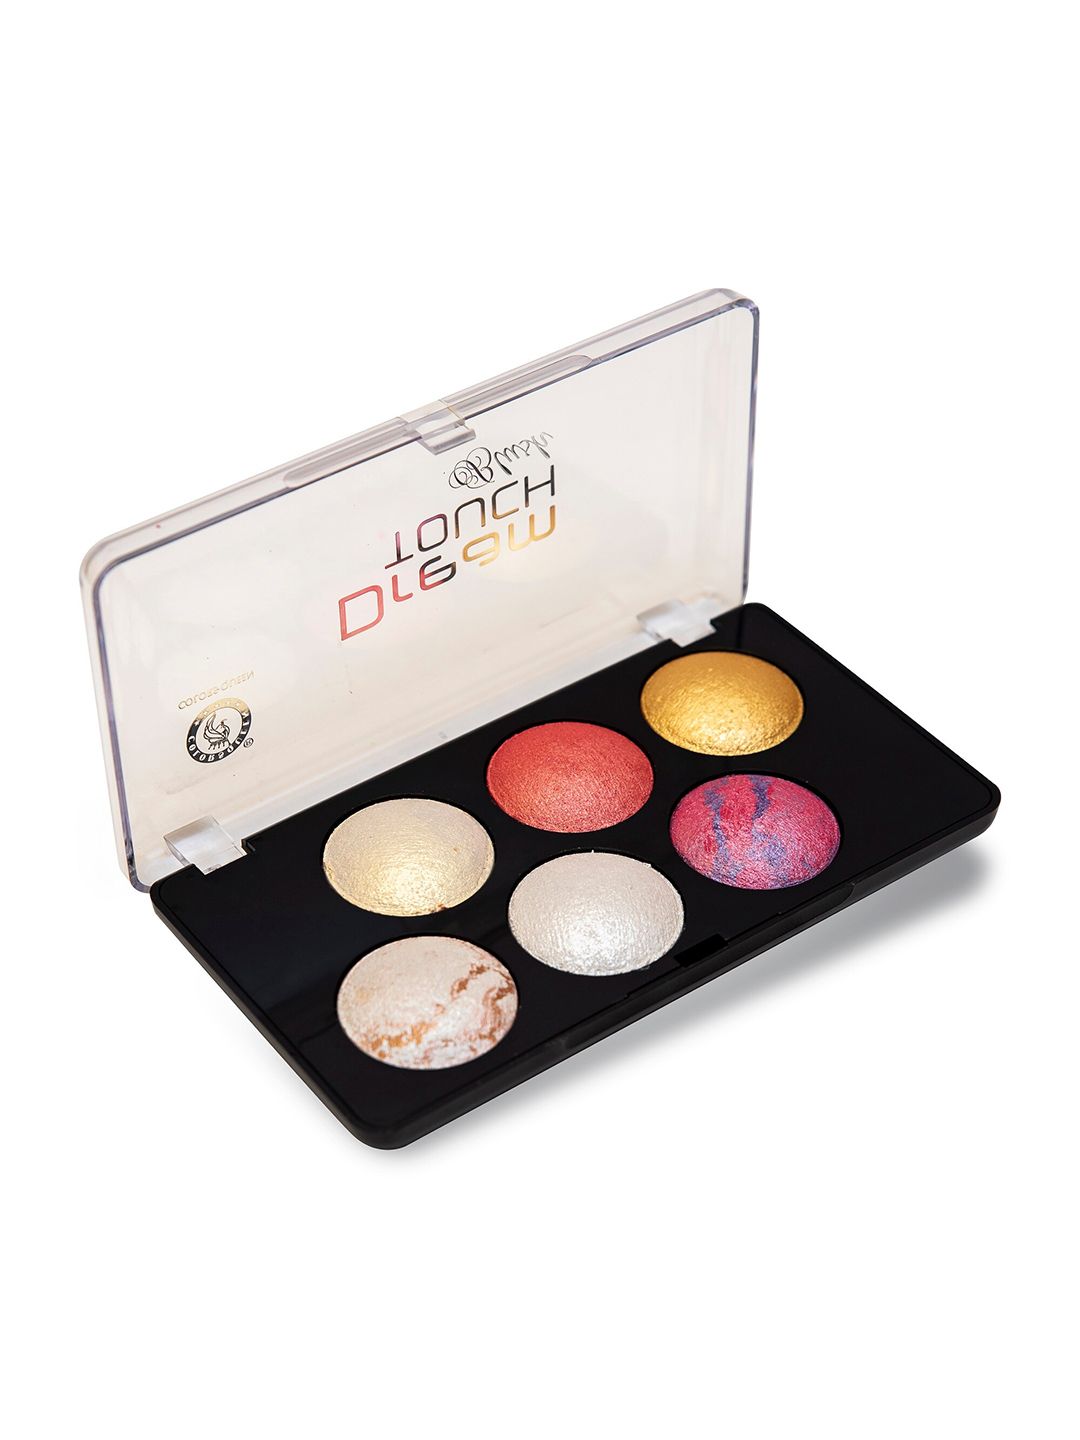 Colors Queen Dream Touch Professional Make up Blusher Palette 18g Price in India